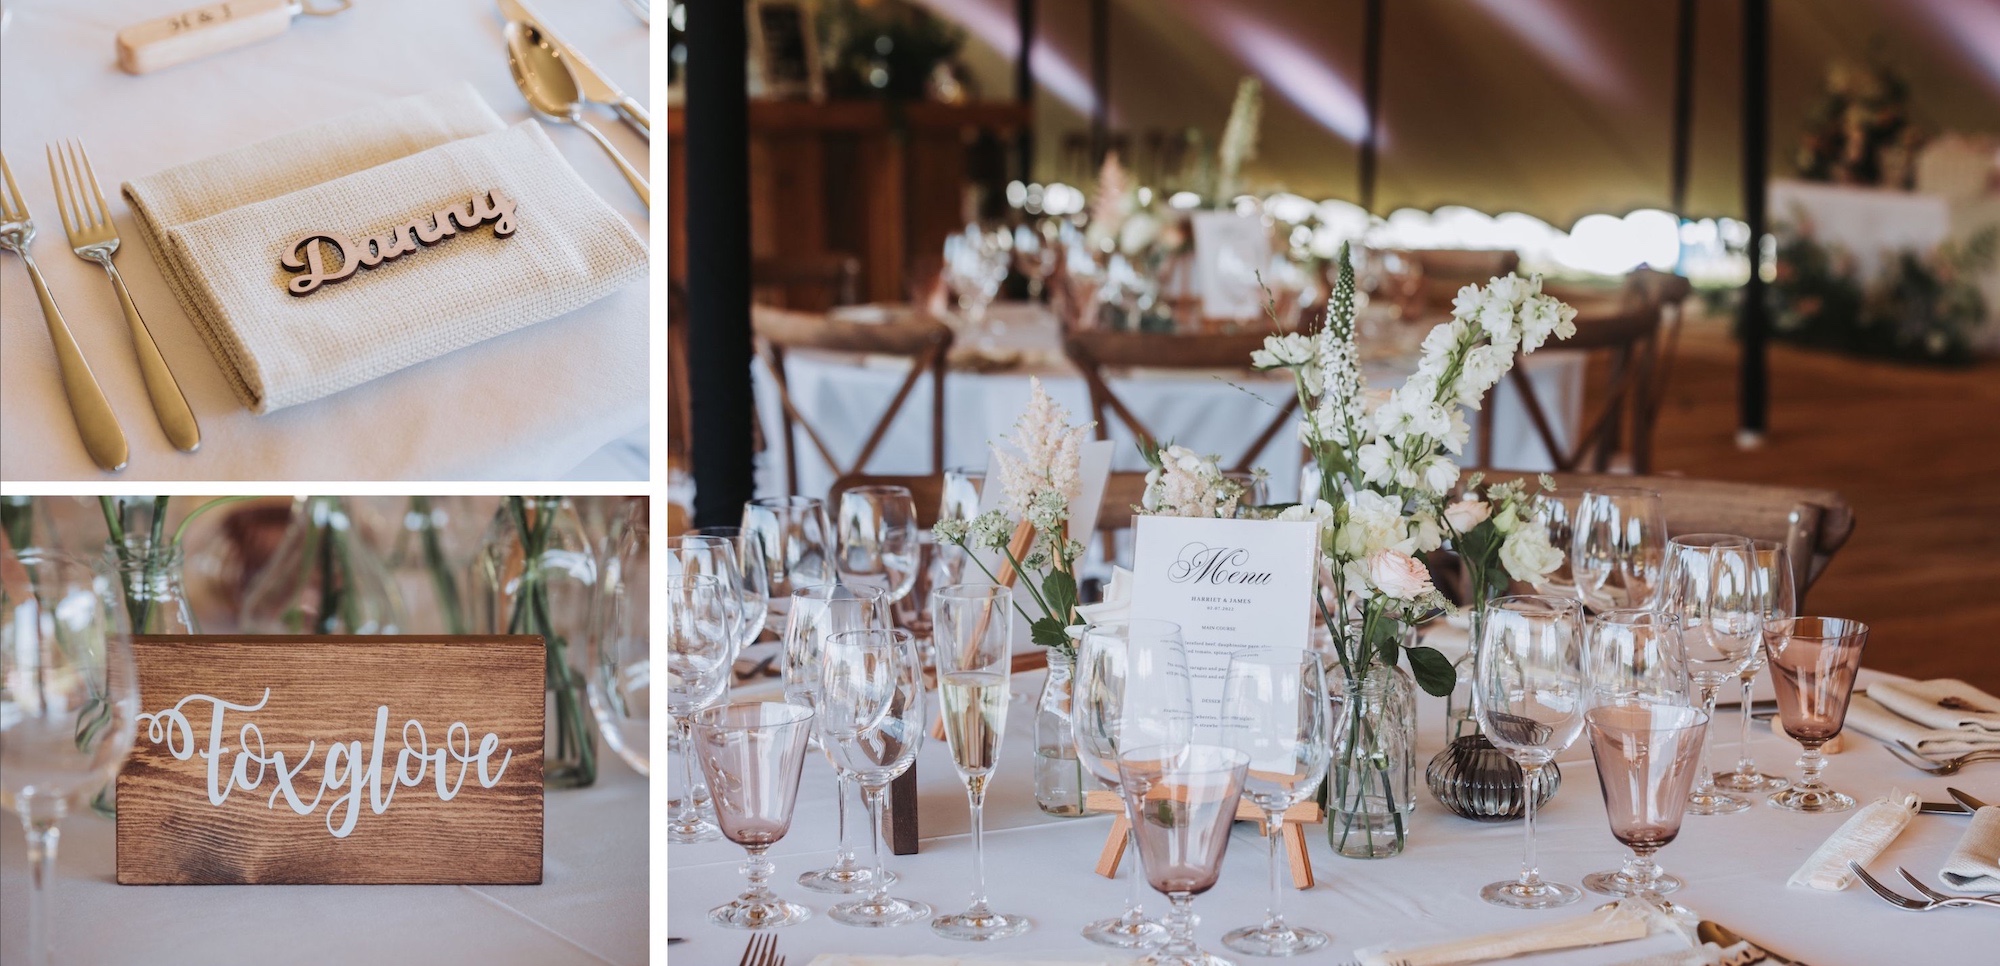 wedding details flowers and table setting marquee